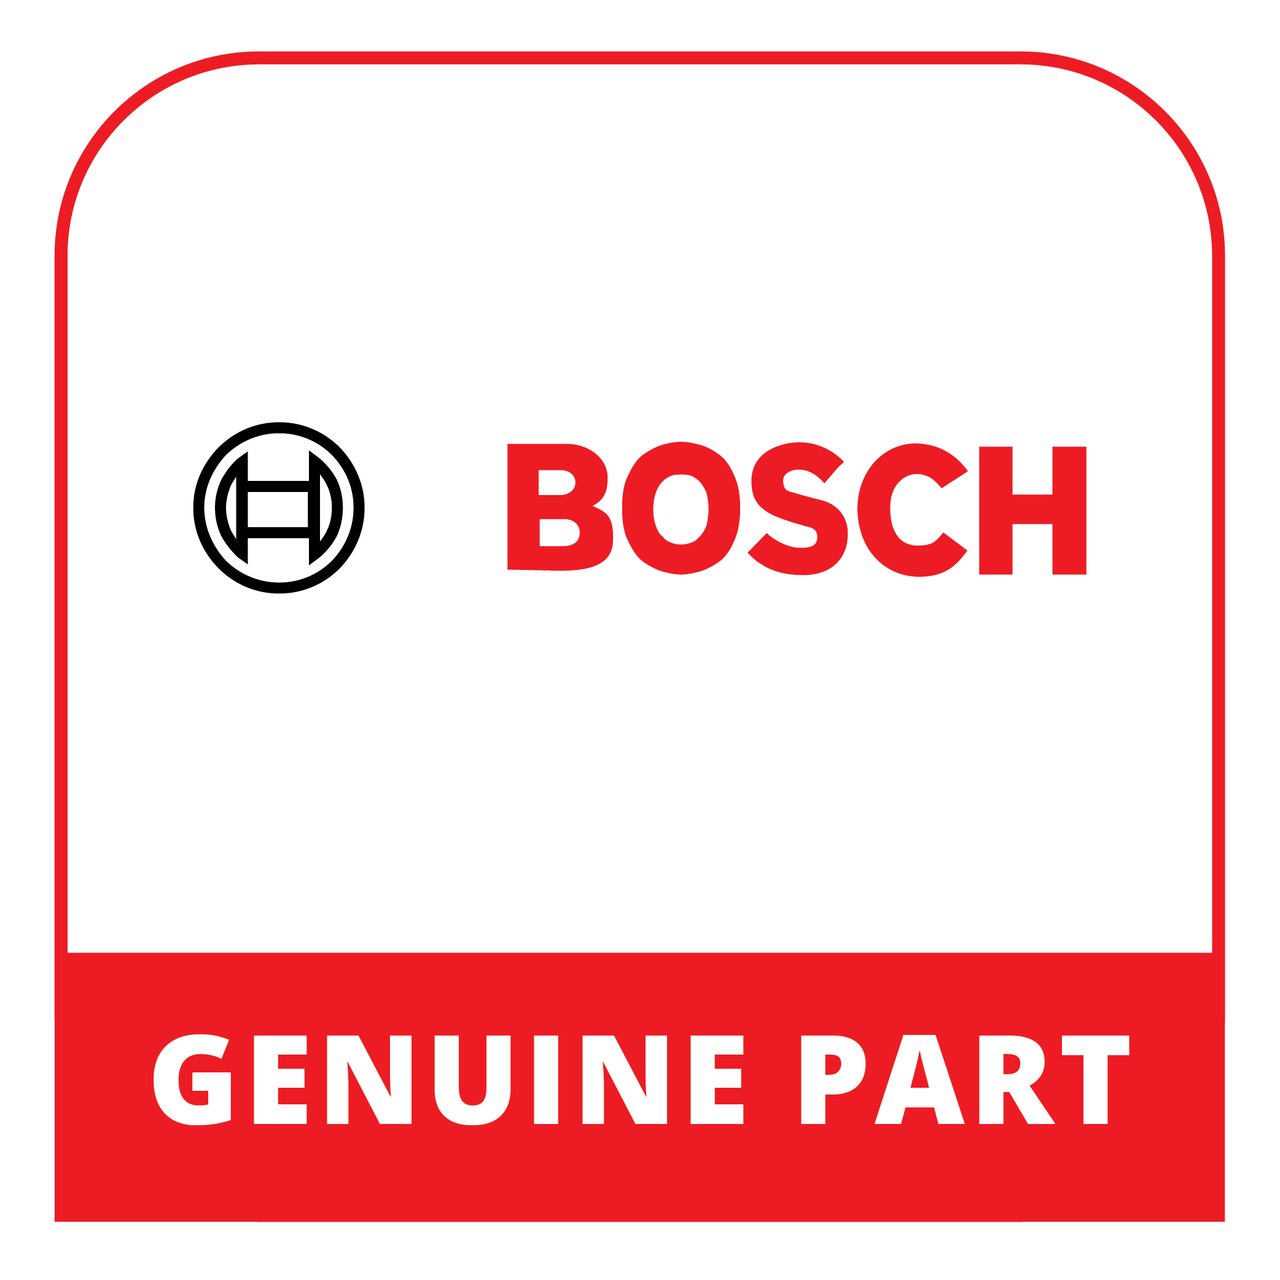 Bosch (Thermador) 17004041 - Clean Air Plus Odor Filter (Replace - Genuine Bosch (Thermador) Part